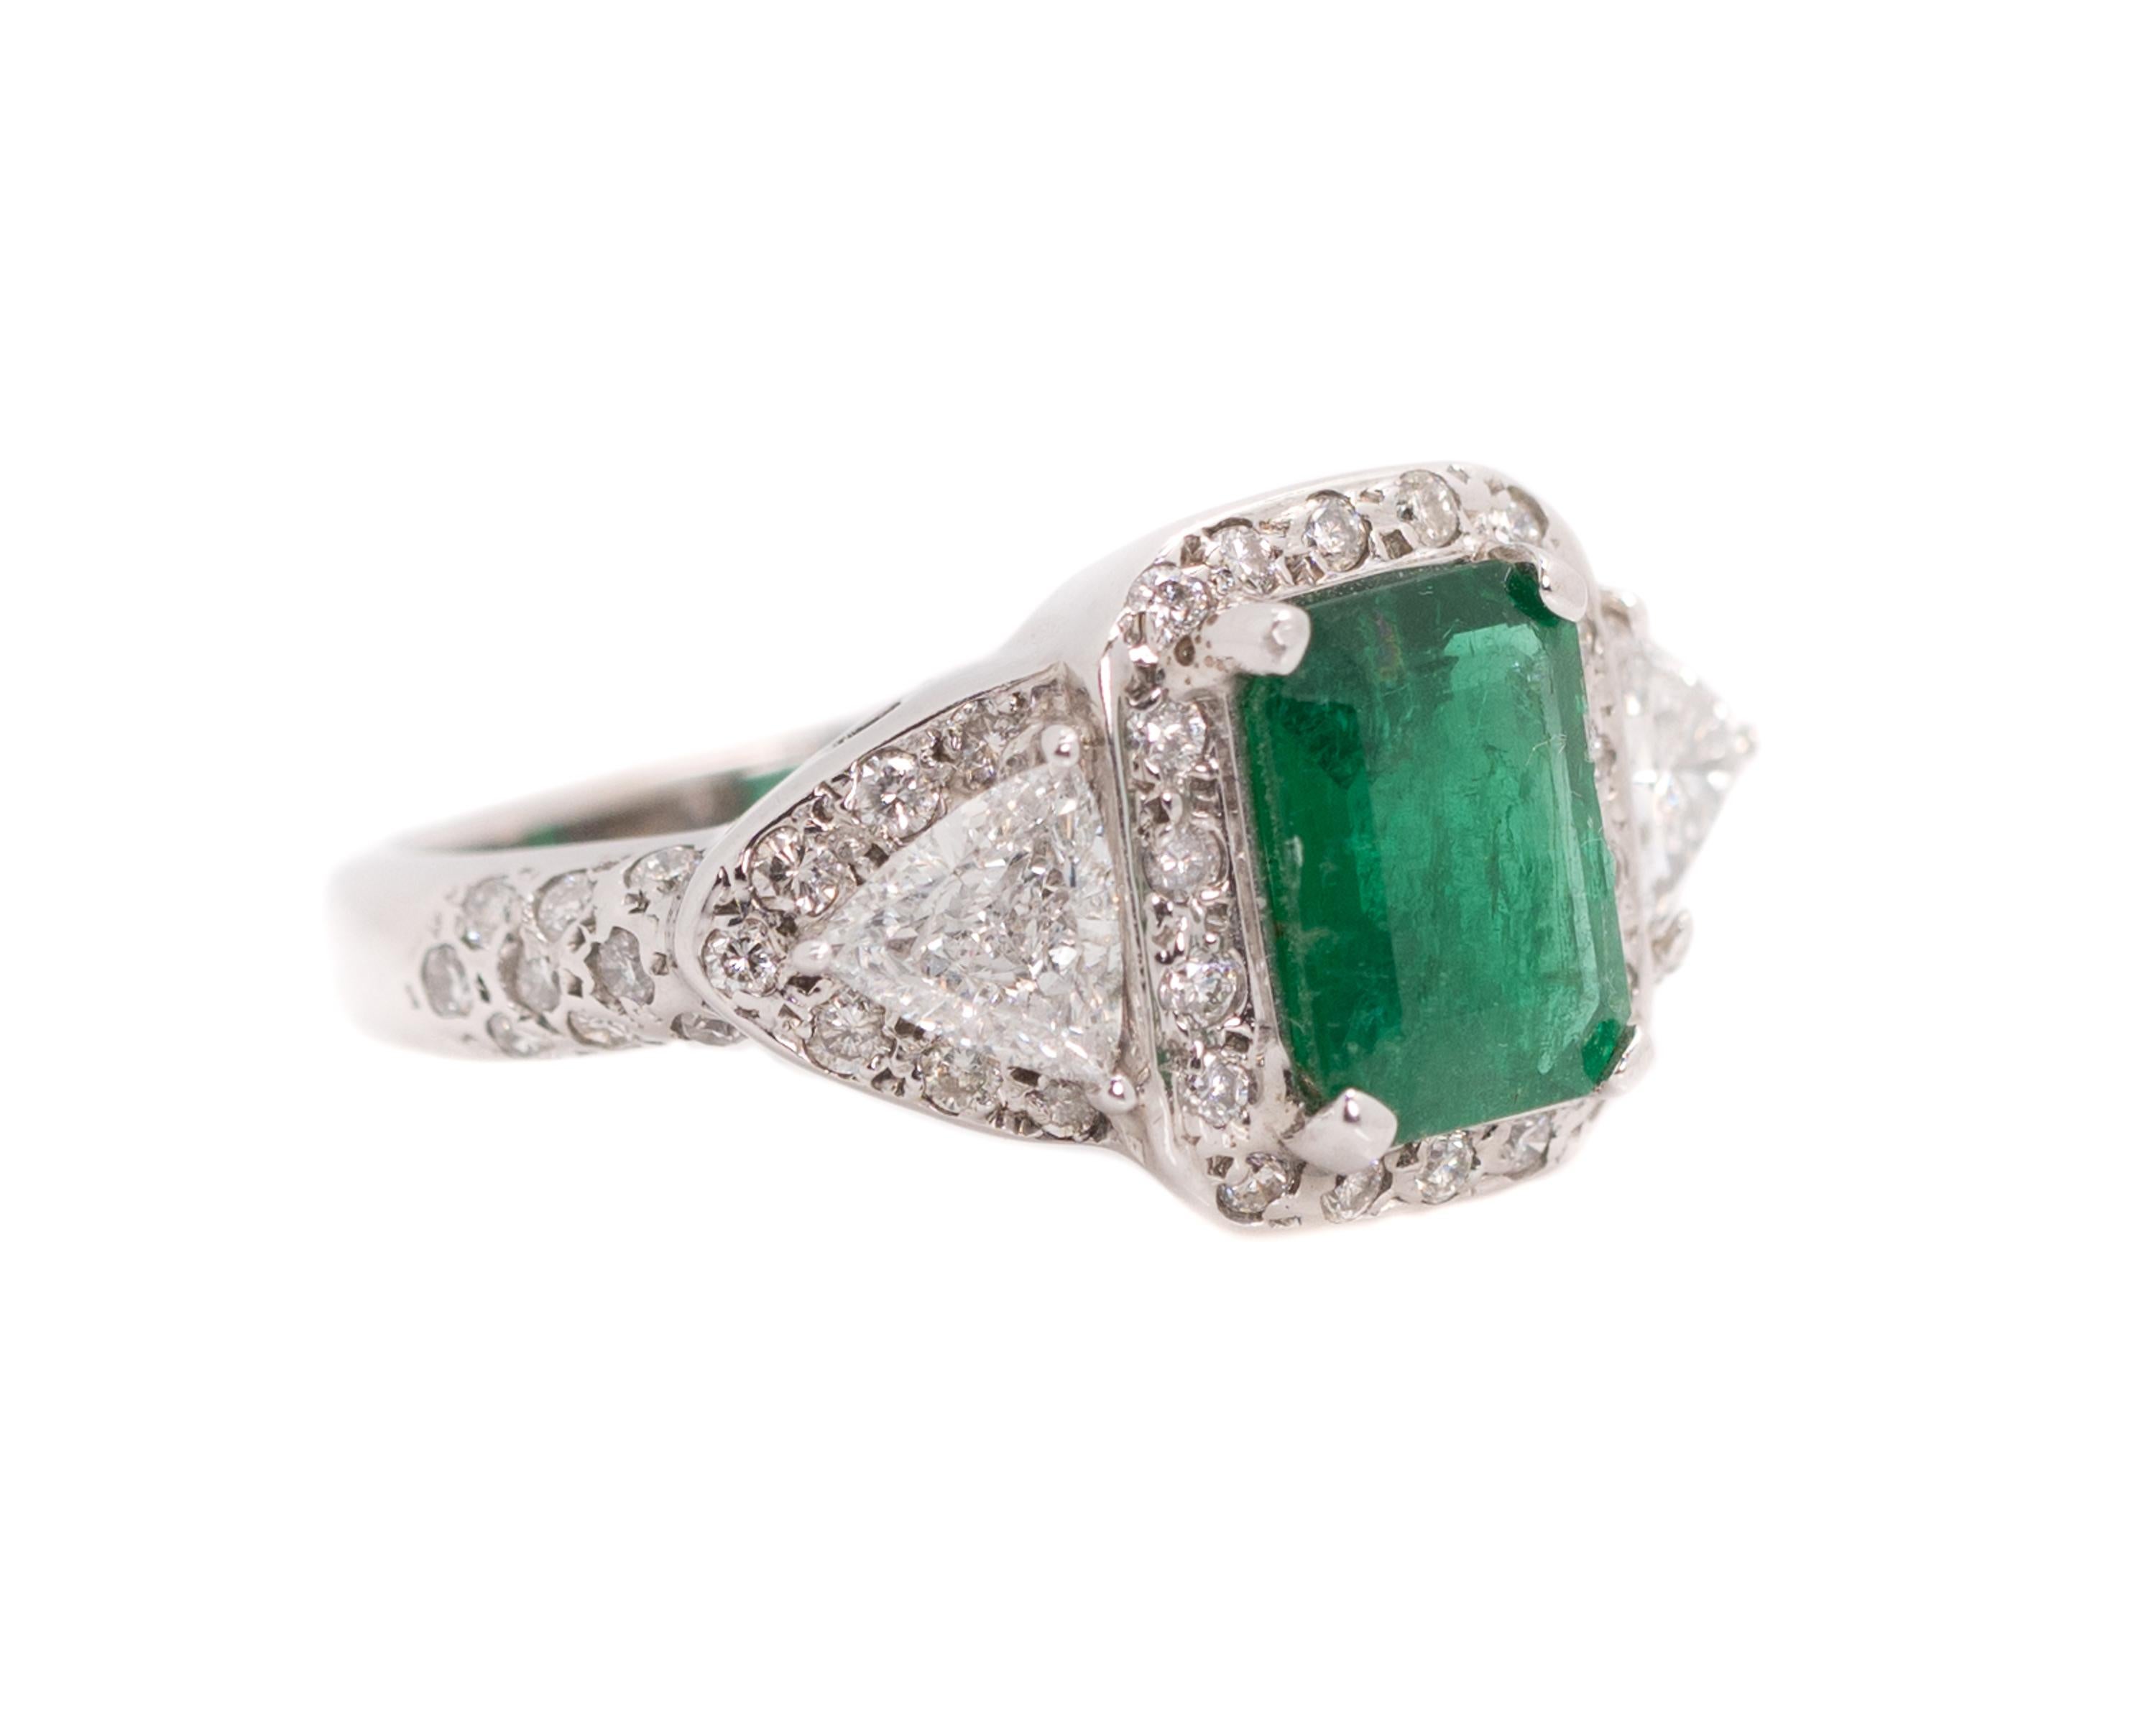 1980s Emerald Ring - 18 Karat White Gold, Emerald, Diamonds

Features:
1.76 carat Emerald cut Colombian Emerald with Round Brilliant Diamond Halo
4-prong set center stone
1.4 carats total weight Trillion and Round Brilliant Diamonds
18 Karat White